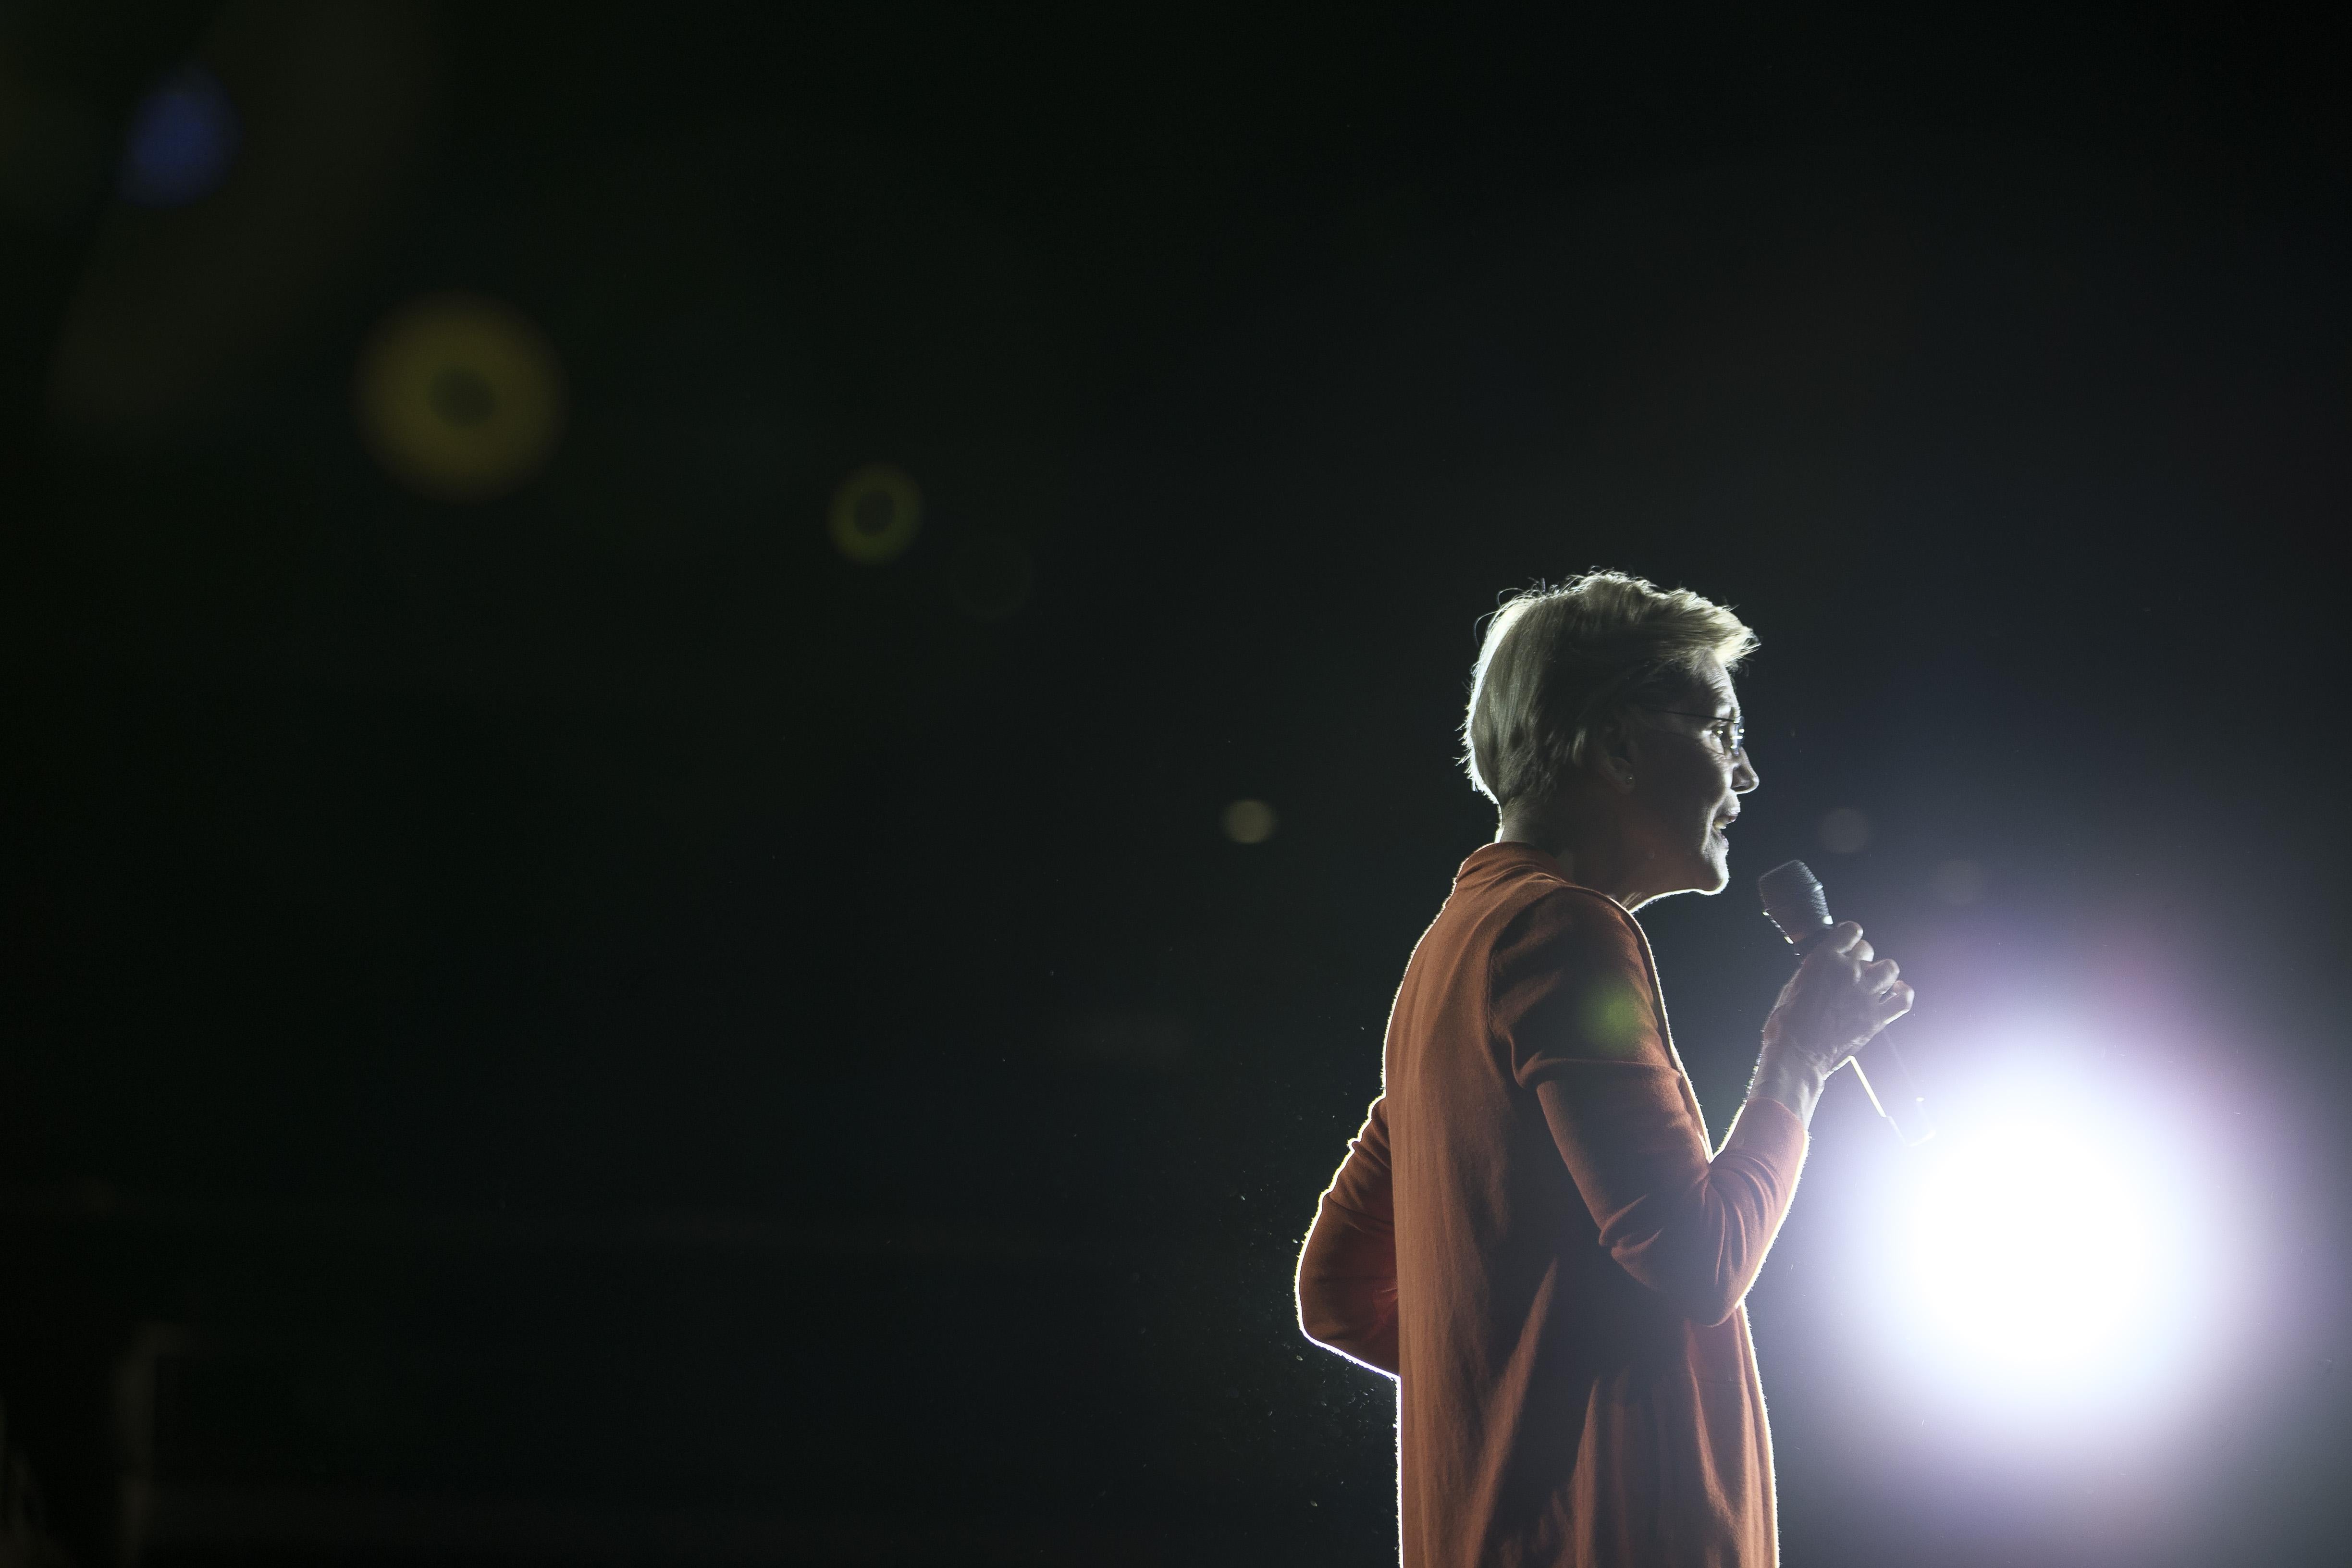 Elizabeth Warren speaks into a mic in front of a bright light onstage at a town hall event on Oct. 18 in Norfolk, Virginia.